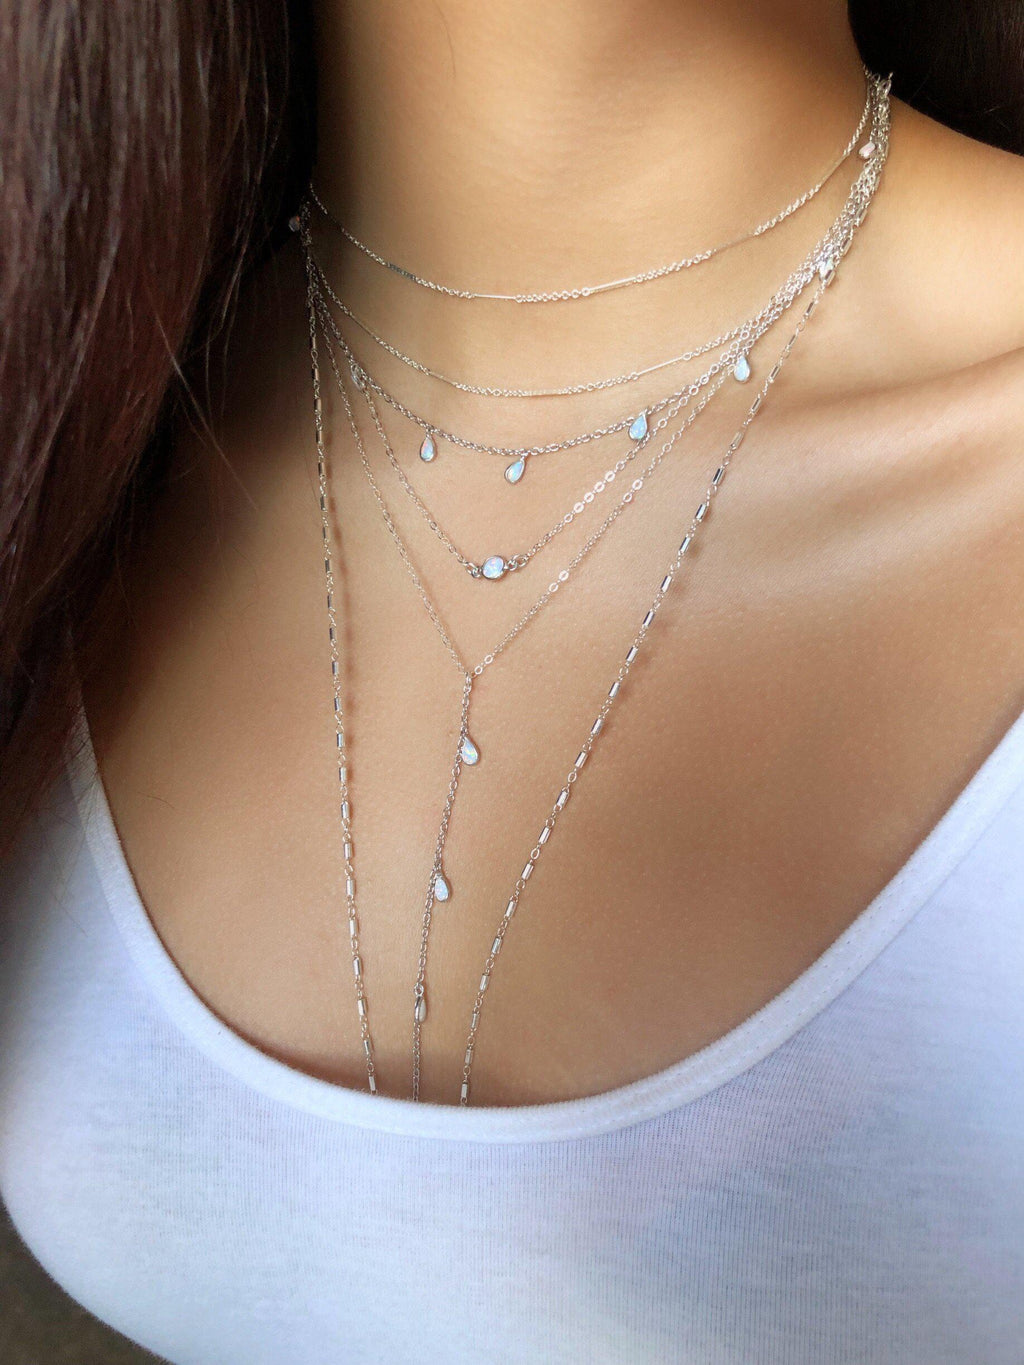 Opal Lariat in Silver-Necklaces-Waffles & Honey Jewelry-Waffles & Honey Jewelry